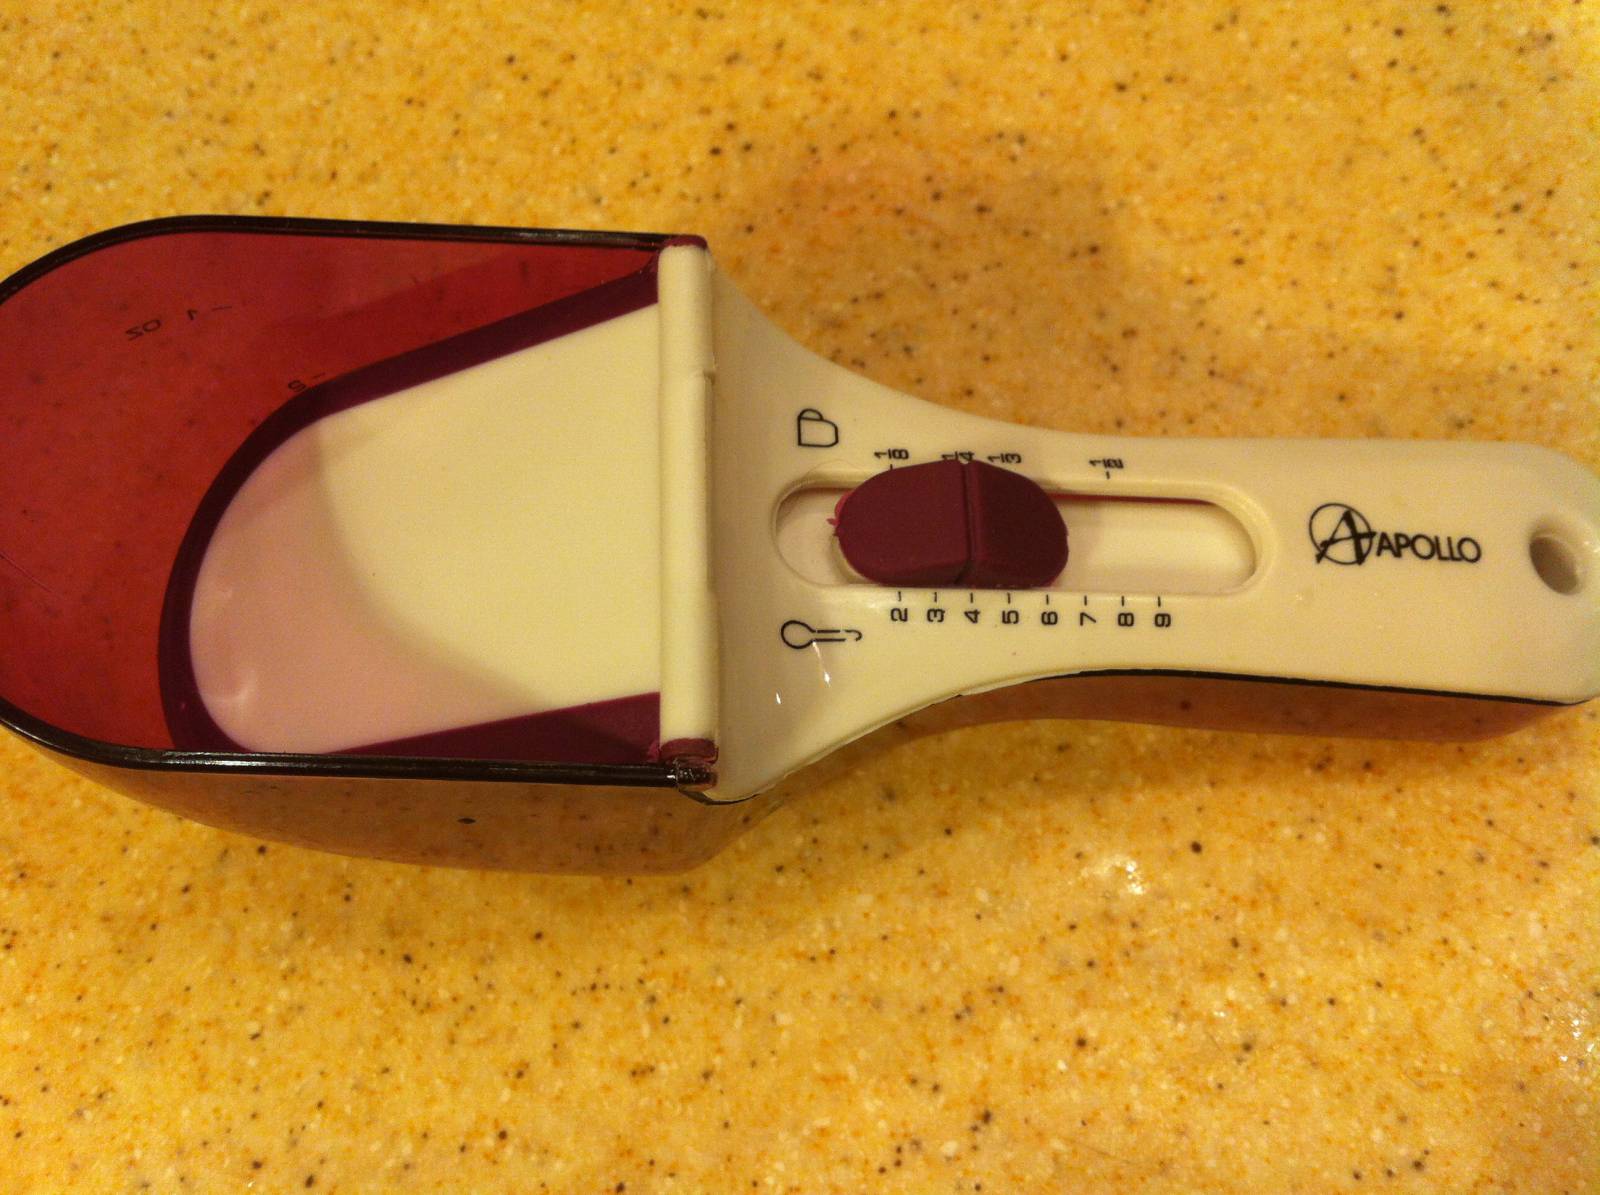 Universal measuring spoon for liquid and dry ingredients